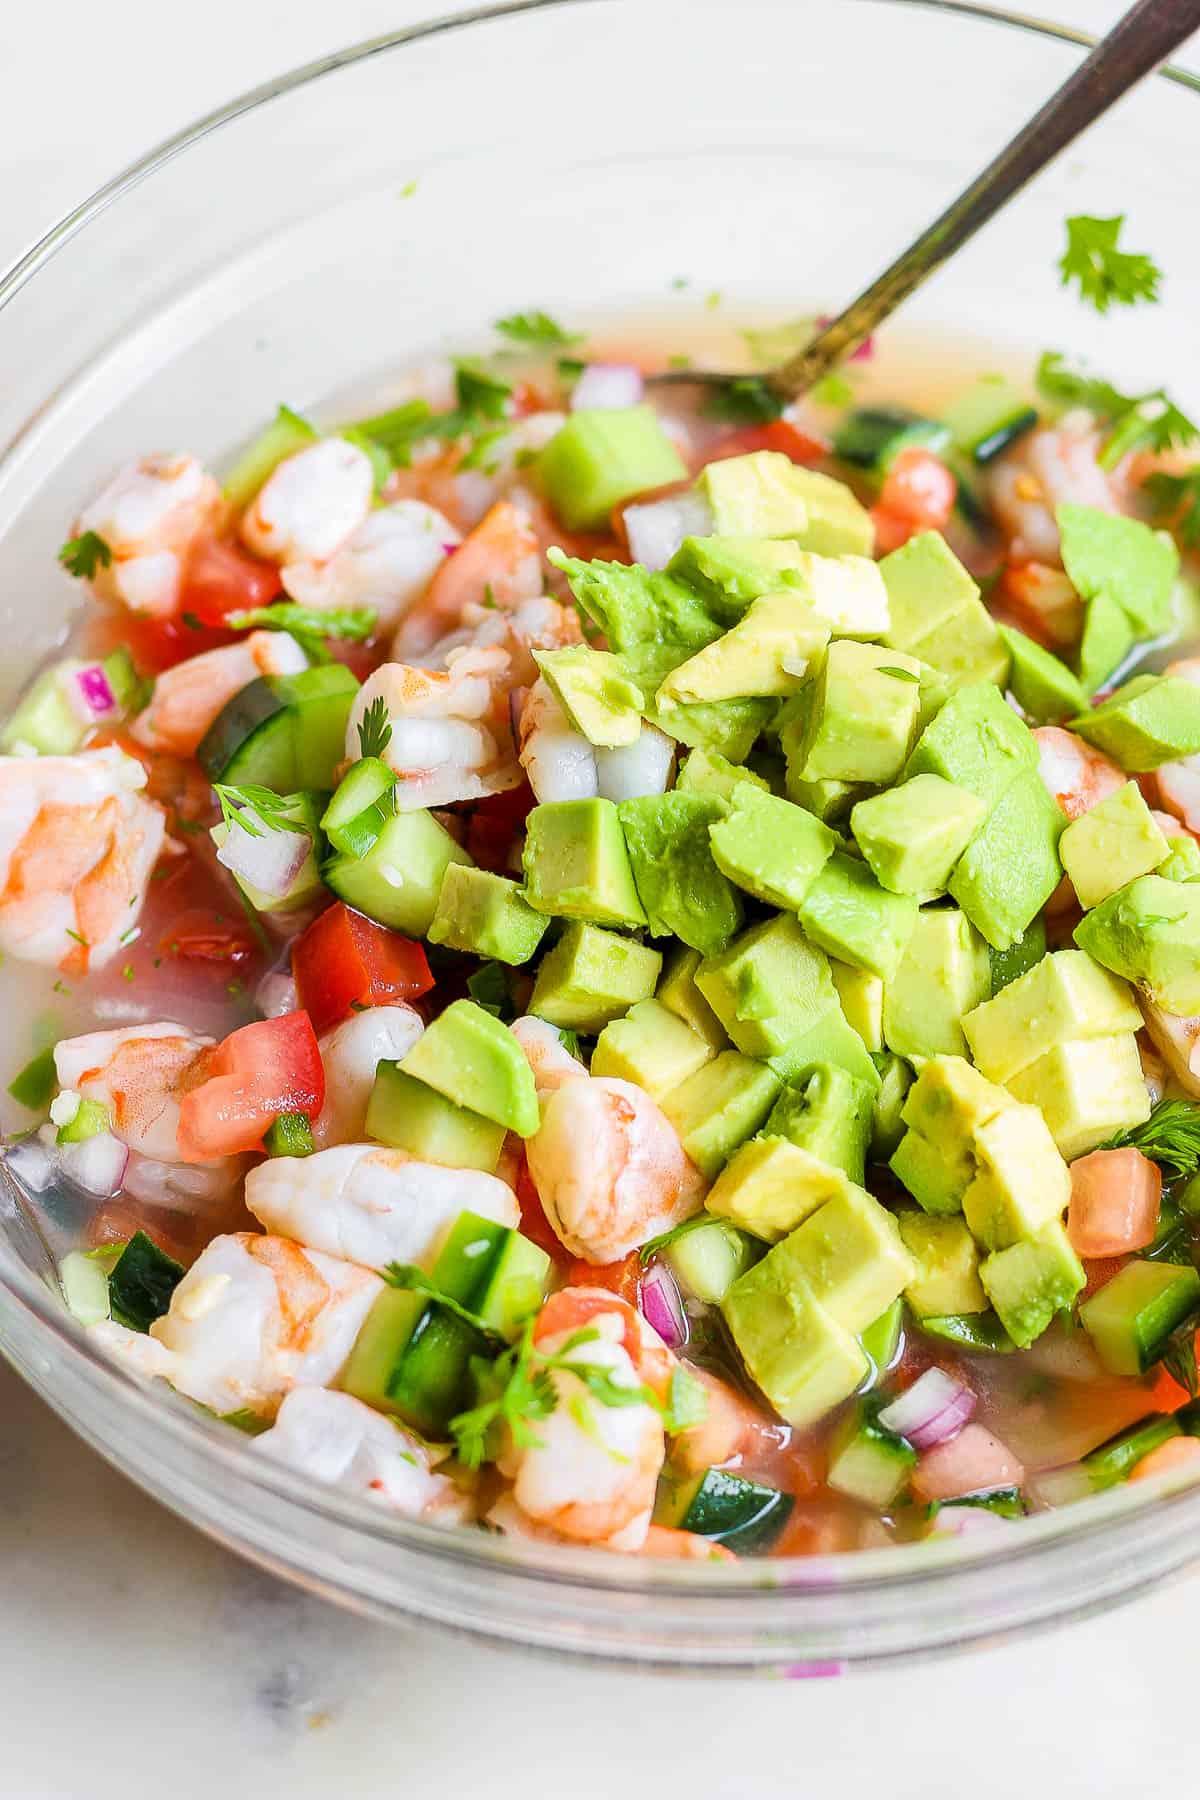 Avocado being mixed into a bowl of ceviche.